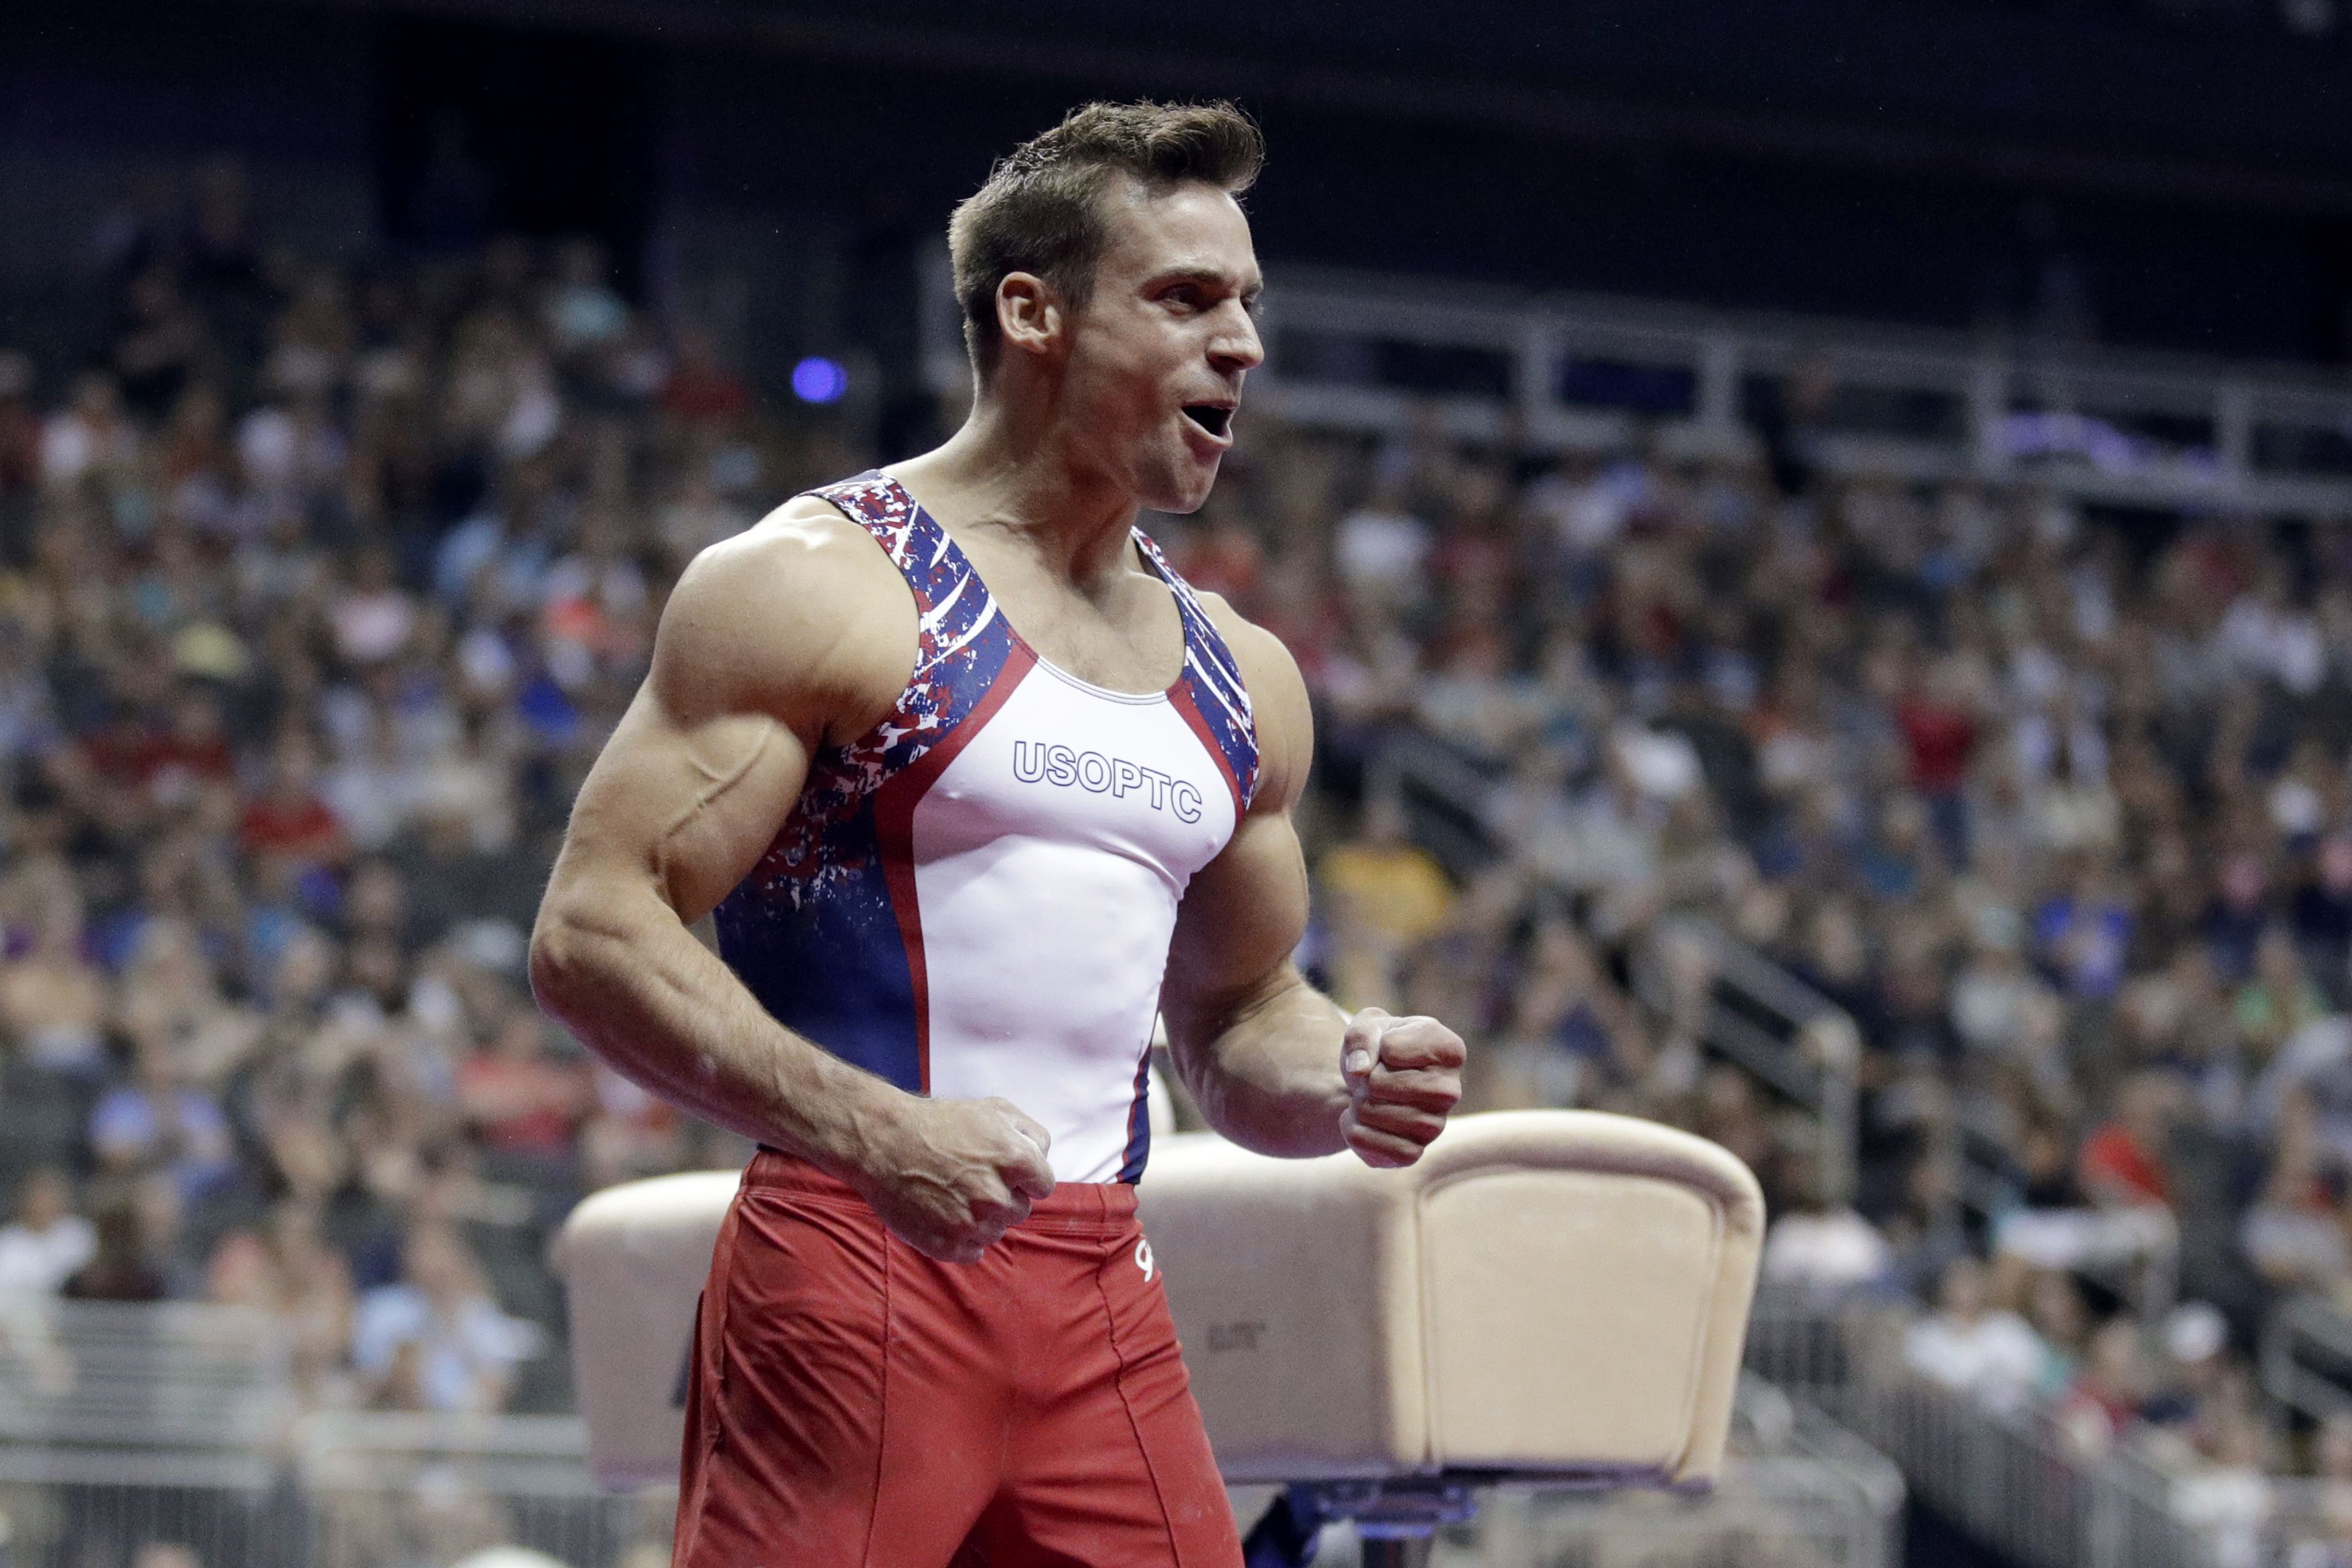 Sam mikulak recently revealed he had a mental breakdown after the 2016 game...